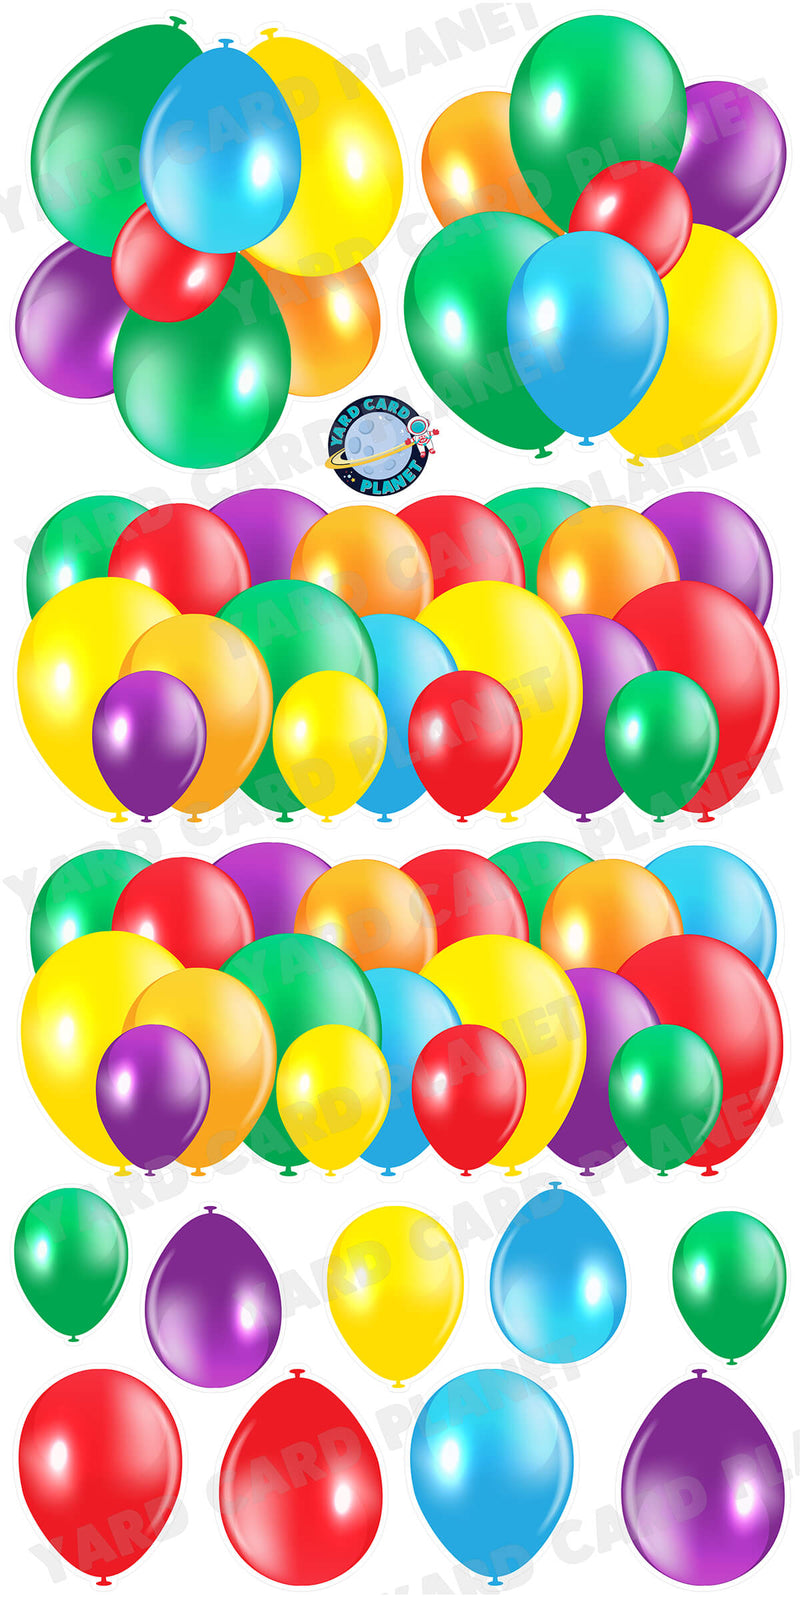 Color Wheel Balloon Panels, Bouquets and Singles Yard Card Set